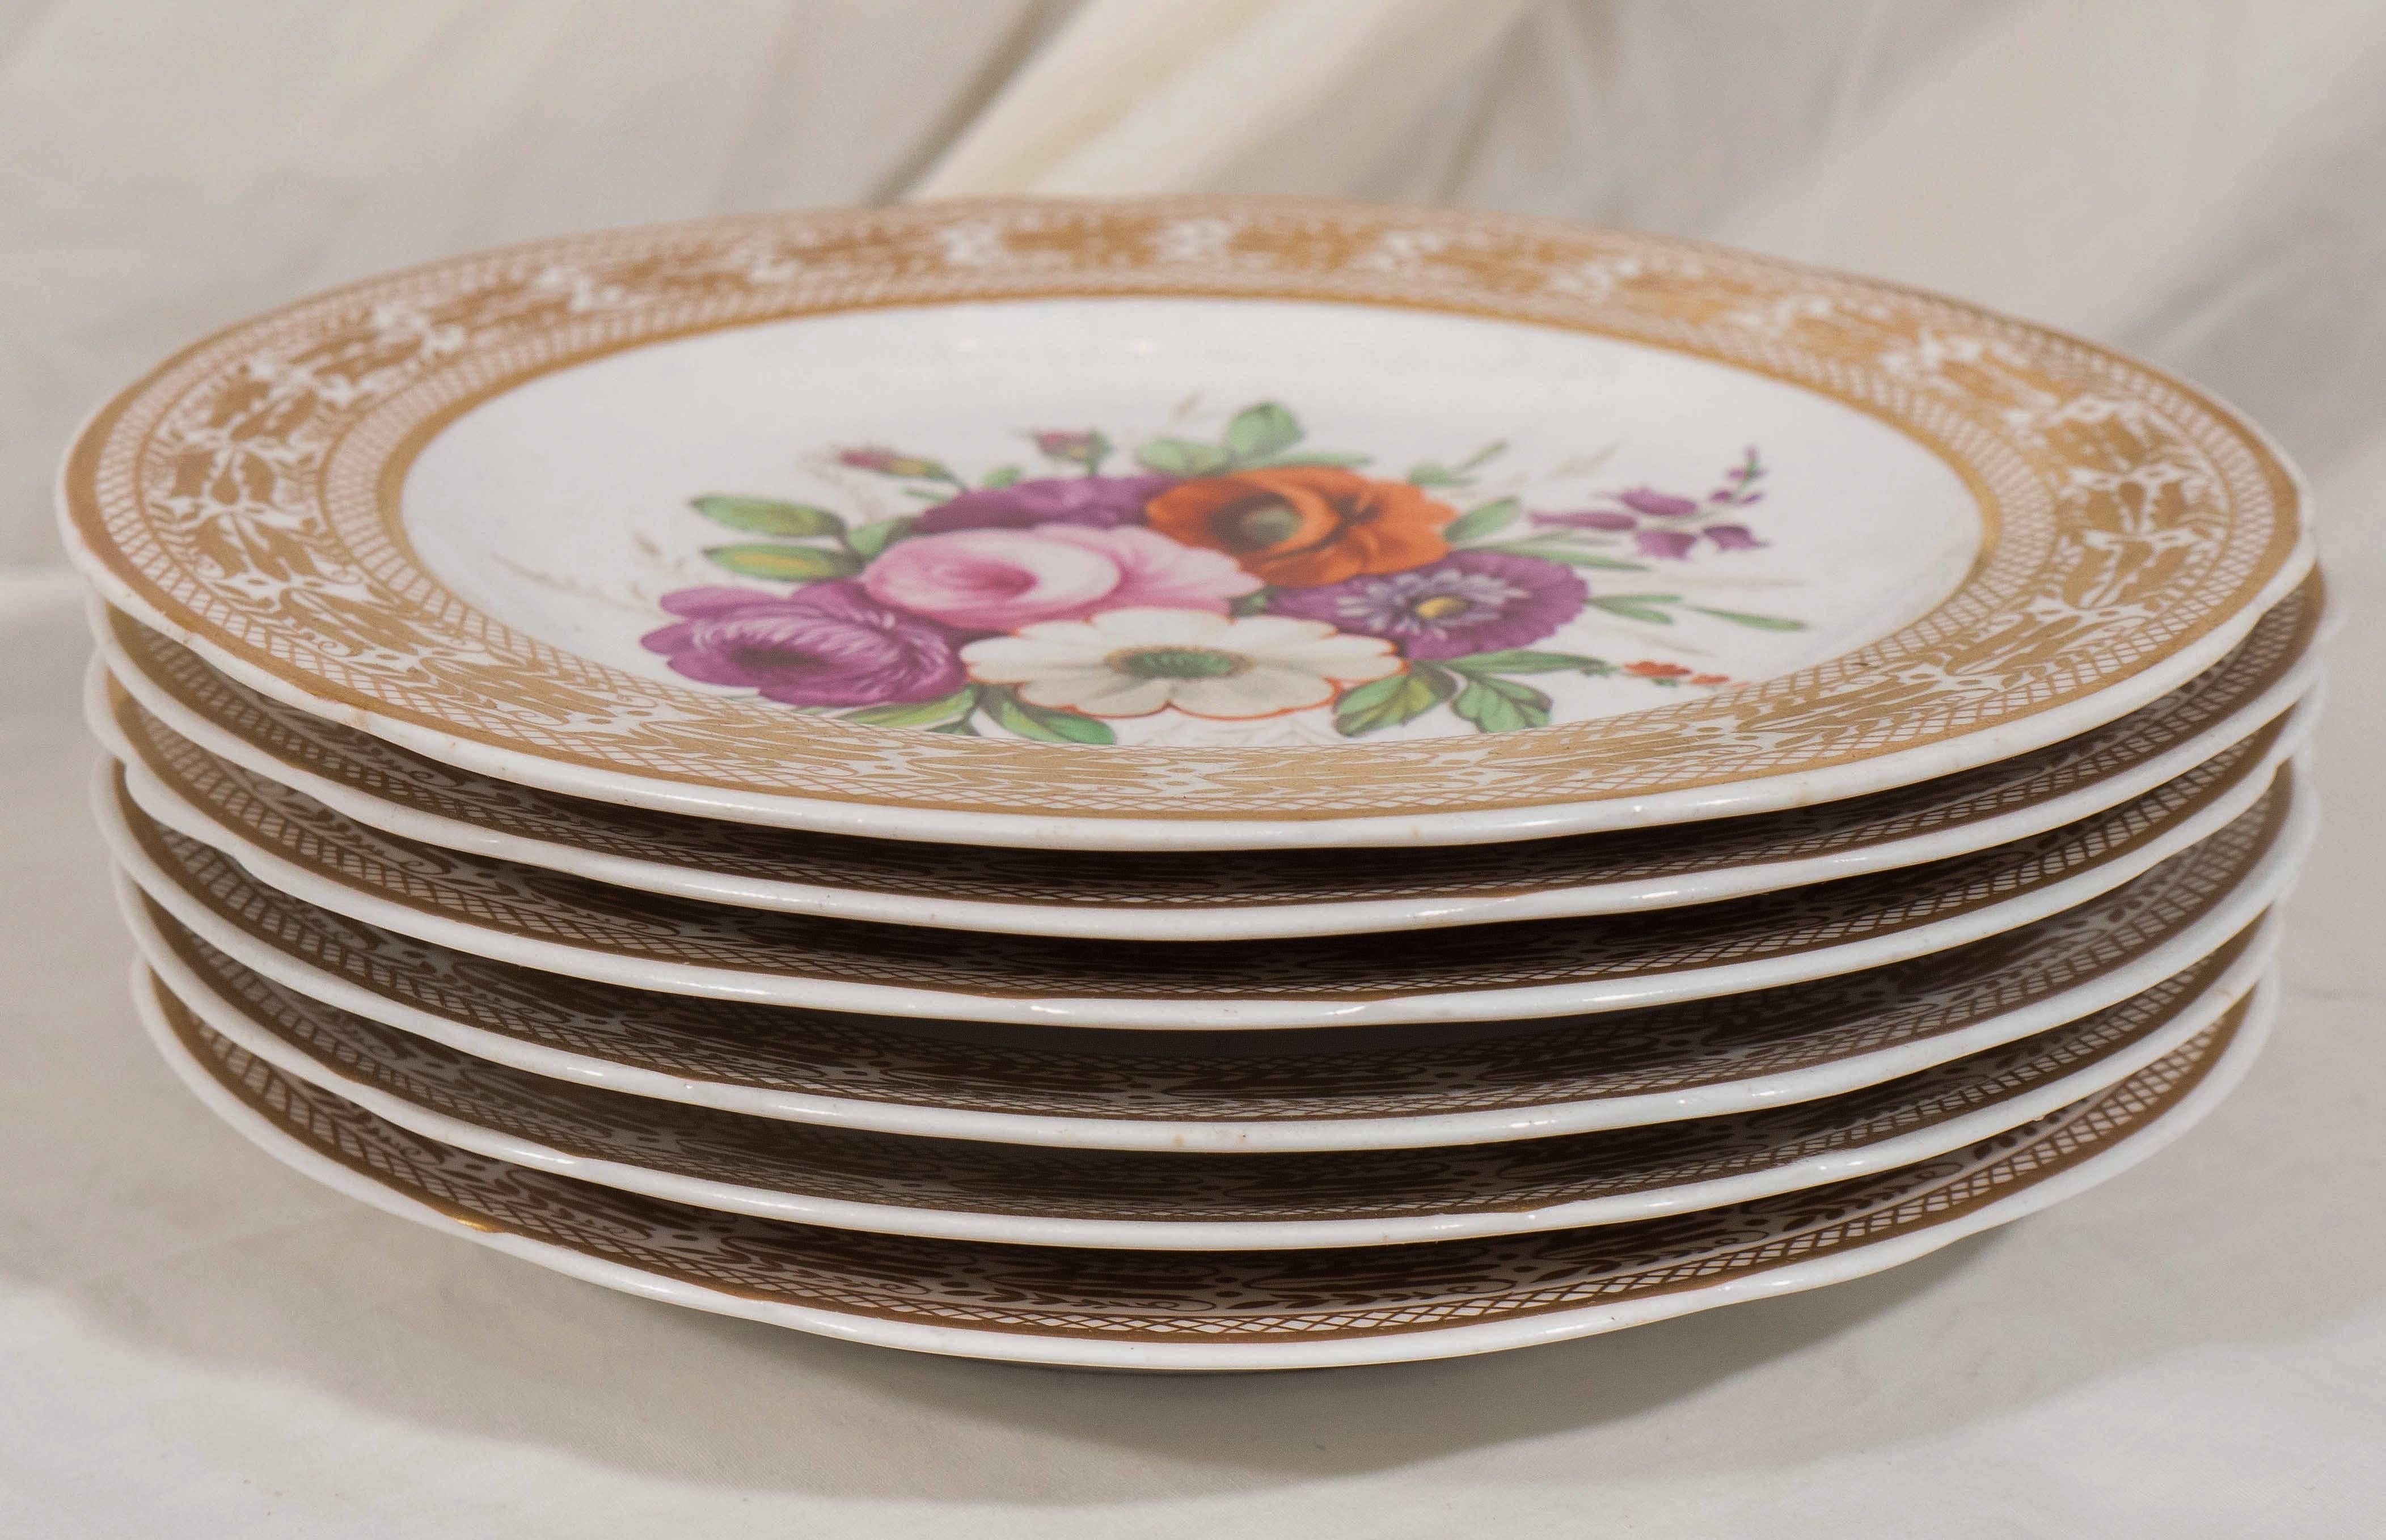 Each dish is hand-painted with a large bouquet of beautifully painted flowers. The bouquets are framed by a wide gold border decorated with stylized tulips and cross hatching.